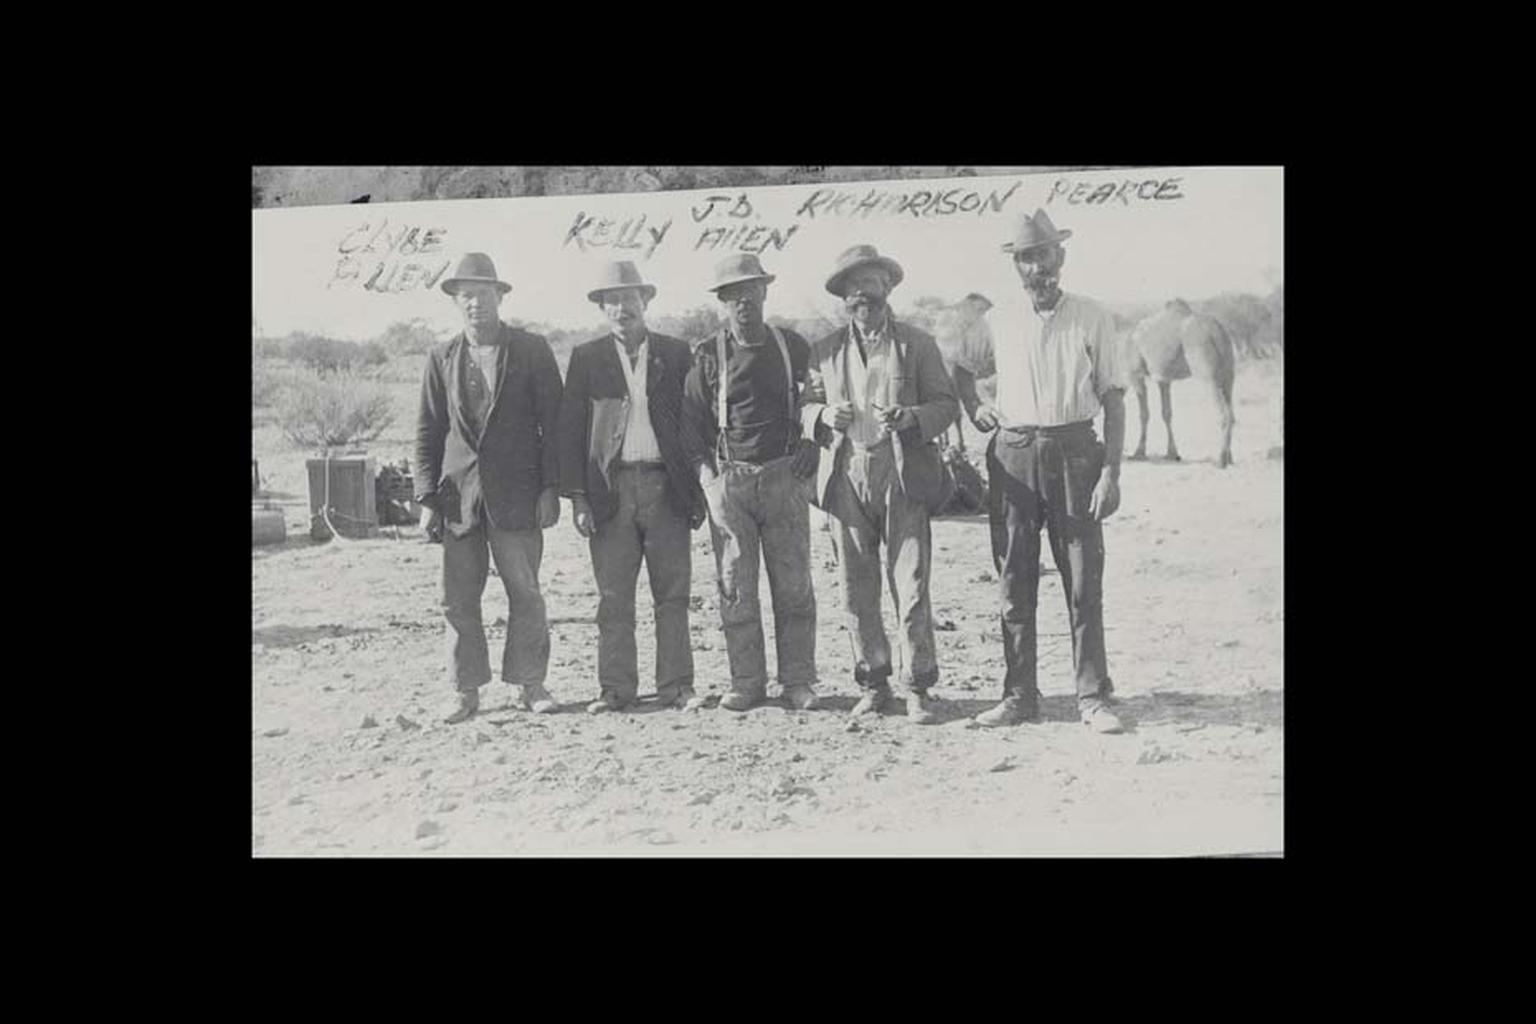 Members of the New Colorado Prospecting Syndicate in Coober Pedy in 1915. The party was led by James Hutchison, whose son Willie discovered opal in what is now known as Coober Pedy. Photo: Courtesy of the Department of State Development, Government of Sou